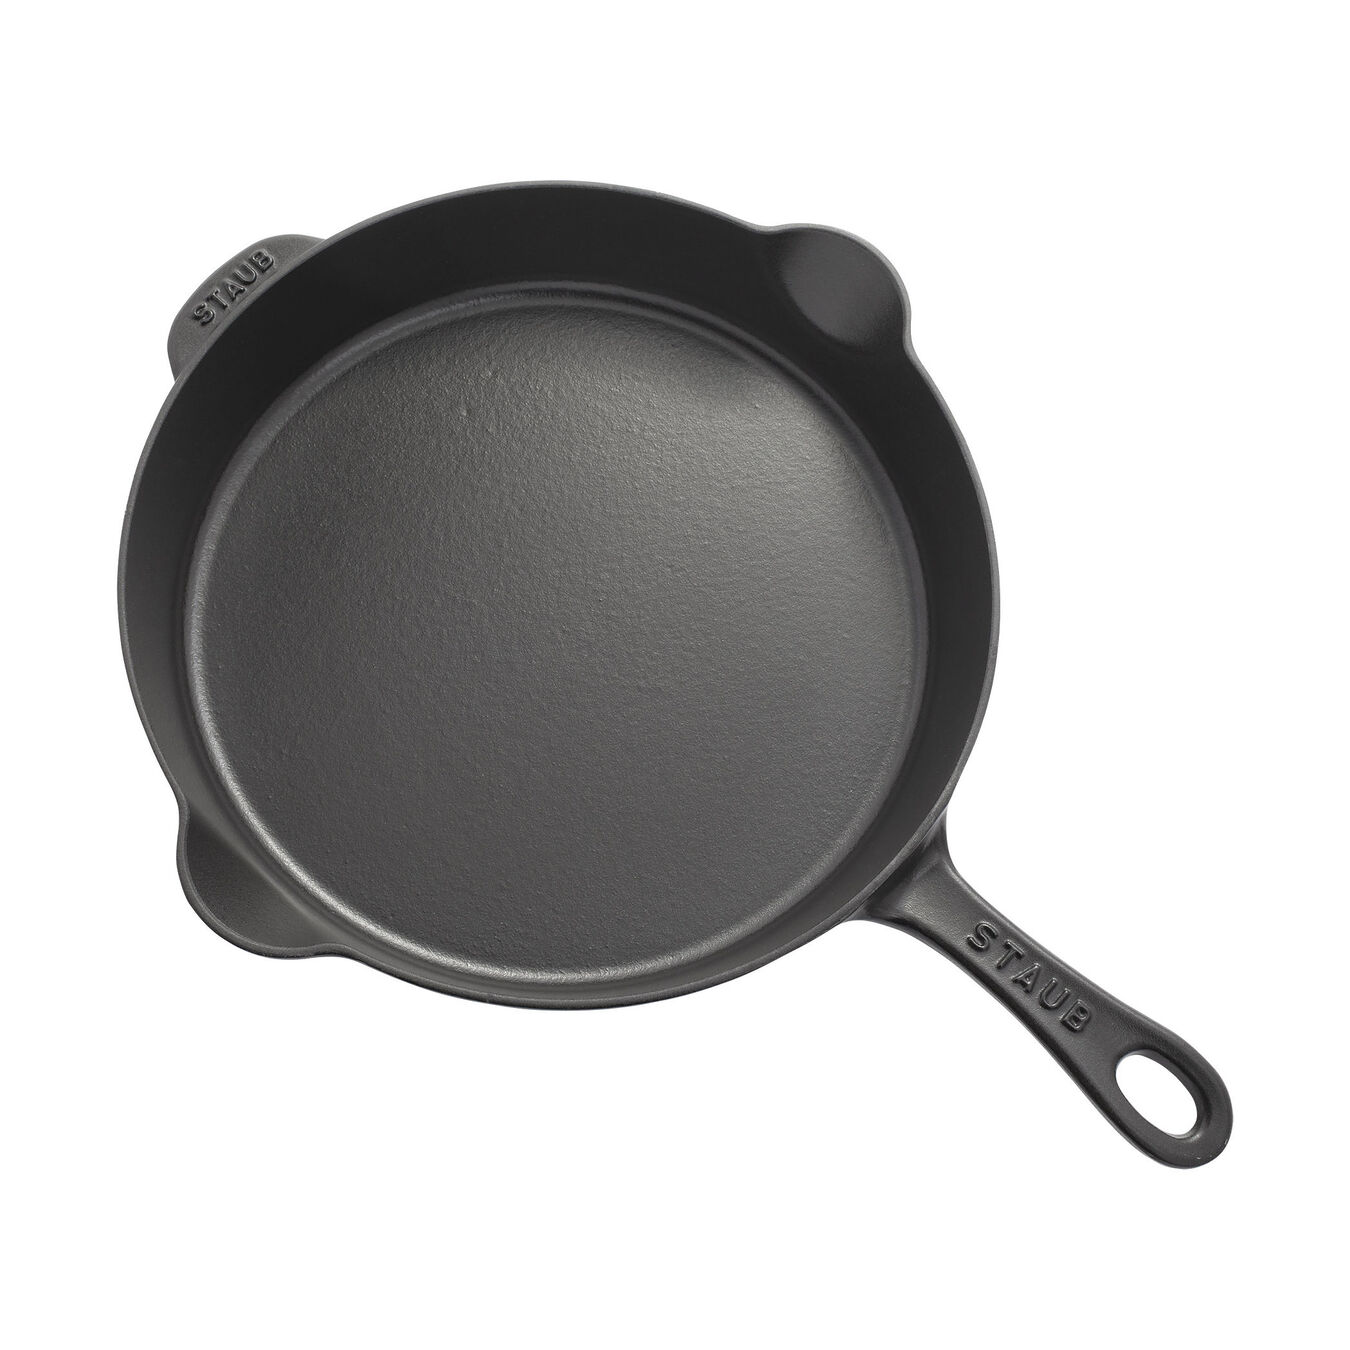 28 cm / 11 inch cast iron Traditional Deep Frypan, black,,large 3